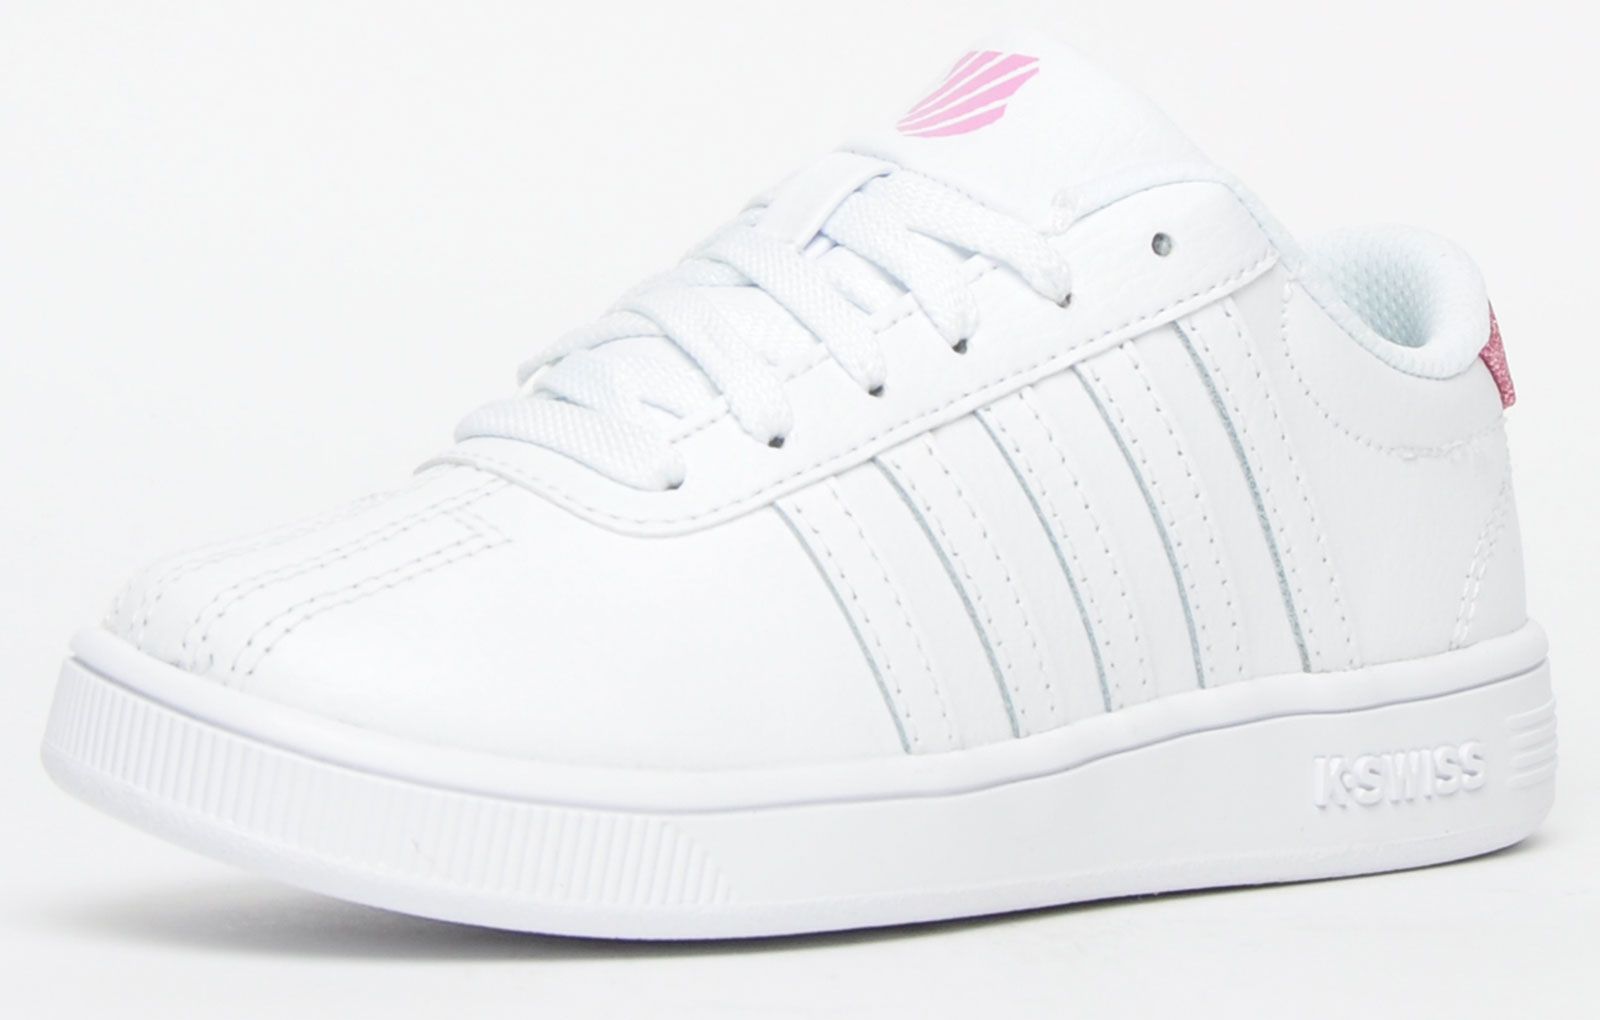 <p>The K Swiss Classic Pro is a classic low-top trainer constructed in a luxe white leather upper with the brand's iconic 5-stripe design adorning the sides, with an shield logo on the tongue, delivering a pristine designer look which anyone would be proud to wear. K Swiss trainers combine quality, style and performance all rolled into one and this K Swiss Classic Pro is no exception, with its intricate decorative stitch detailing and traditional lace up fastening to keep your feet firmly in place, the Classic Pro is a timeless style offering a dynamic look. <br></p><br> <p class=